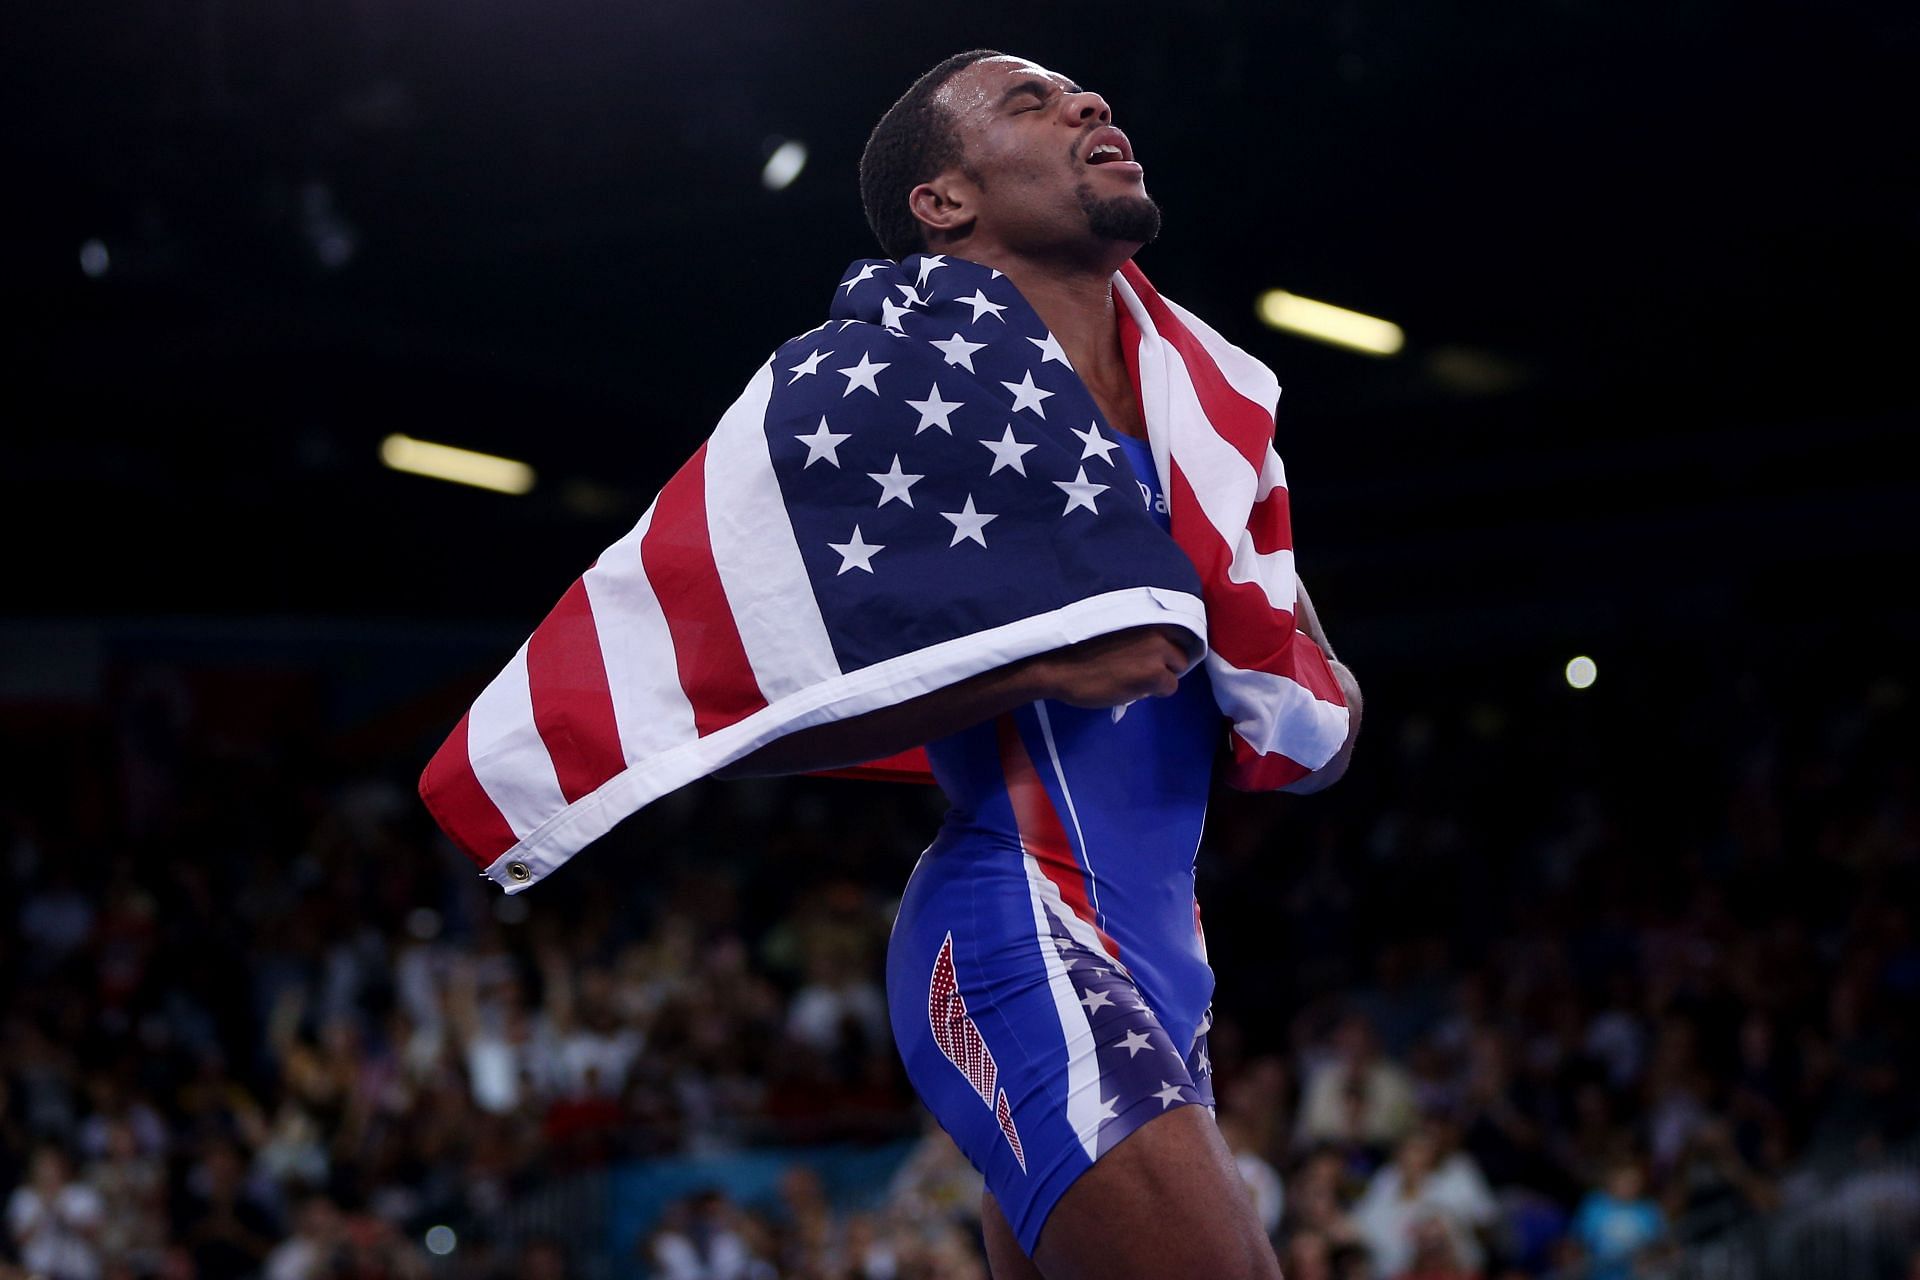 Jordan Burroughs of the United States celebrates his gold medal in the Men&#039;s Freestyle 74 kg Wrestling on Day 14 of the London 2012 Olympic Games at ExCeL on August 10, 2012 in London, England. (Photo by Feng Li/Getty Images)